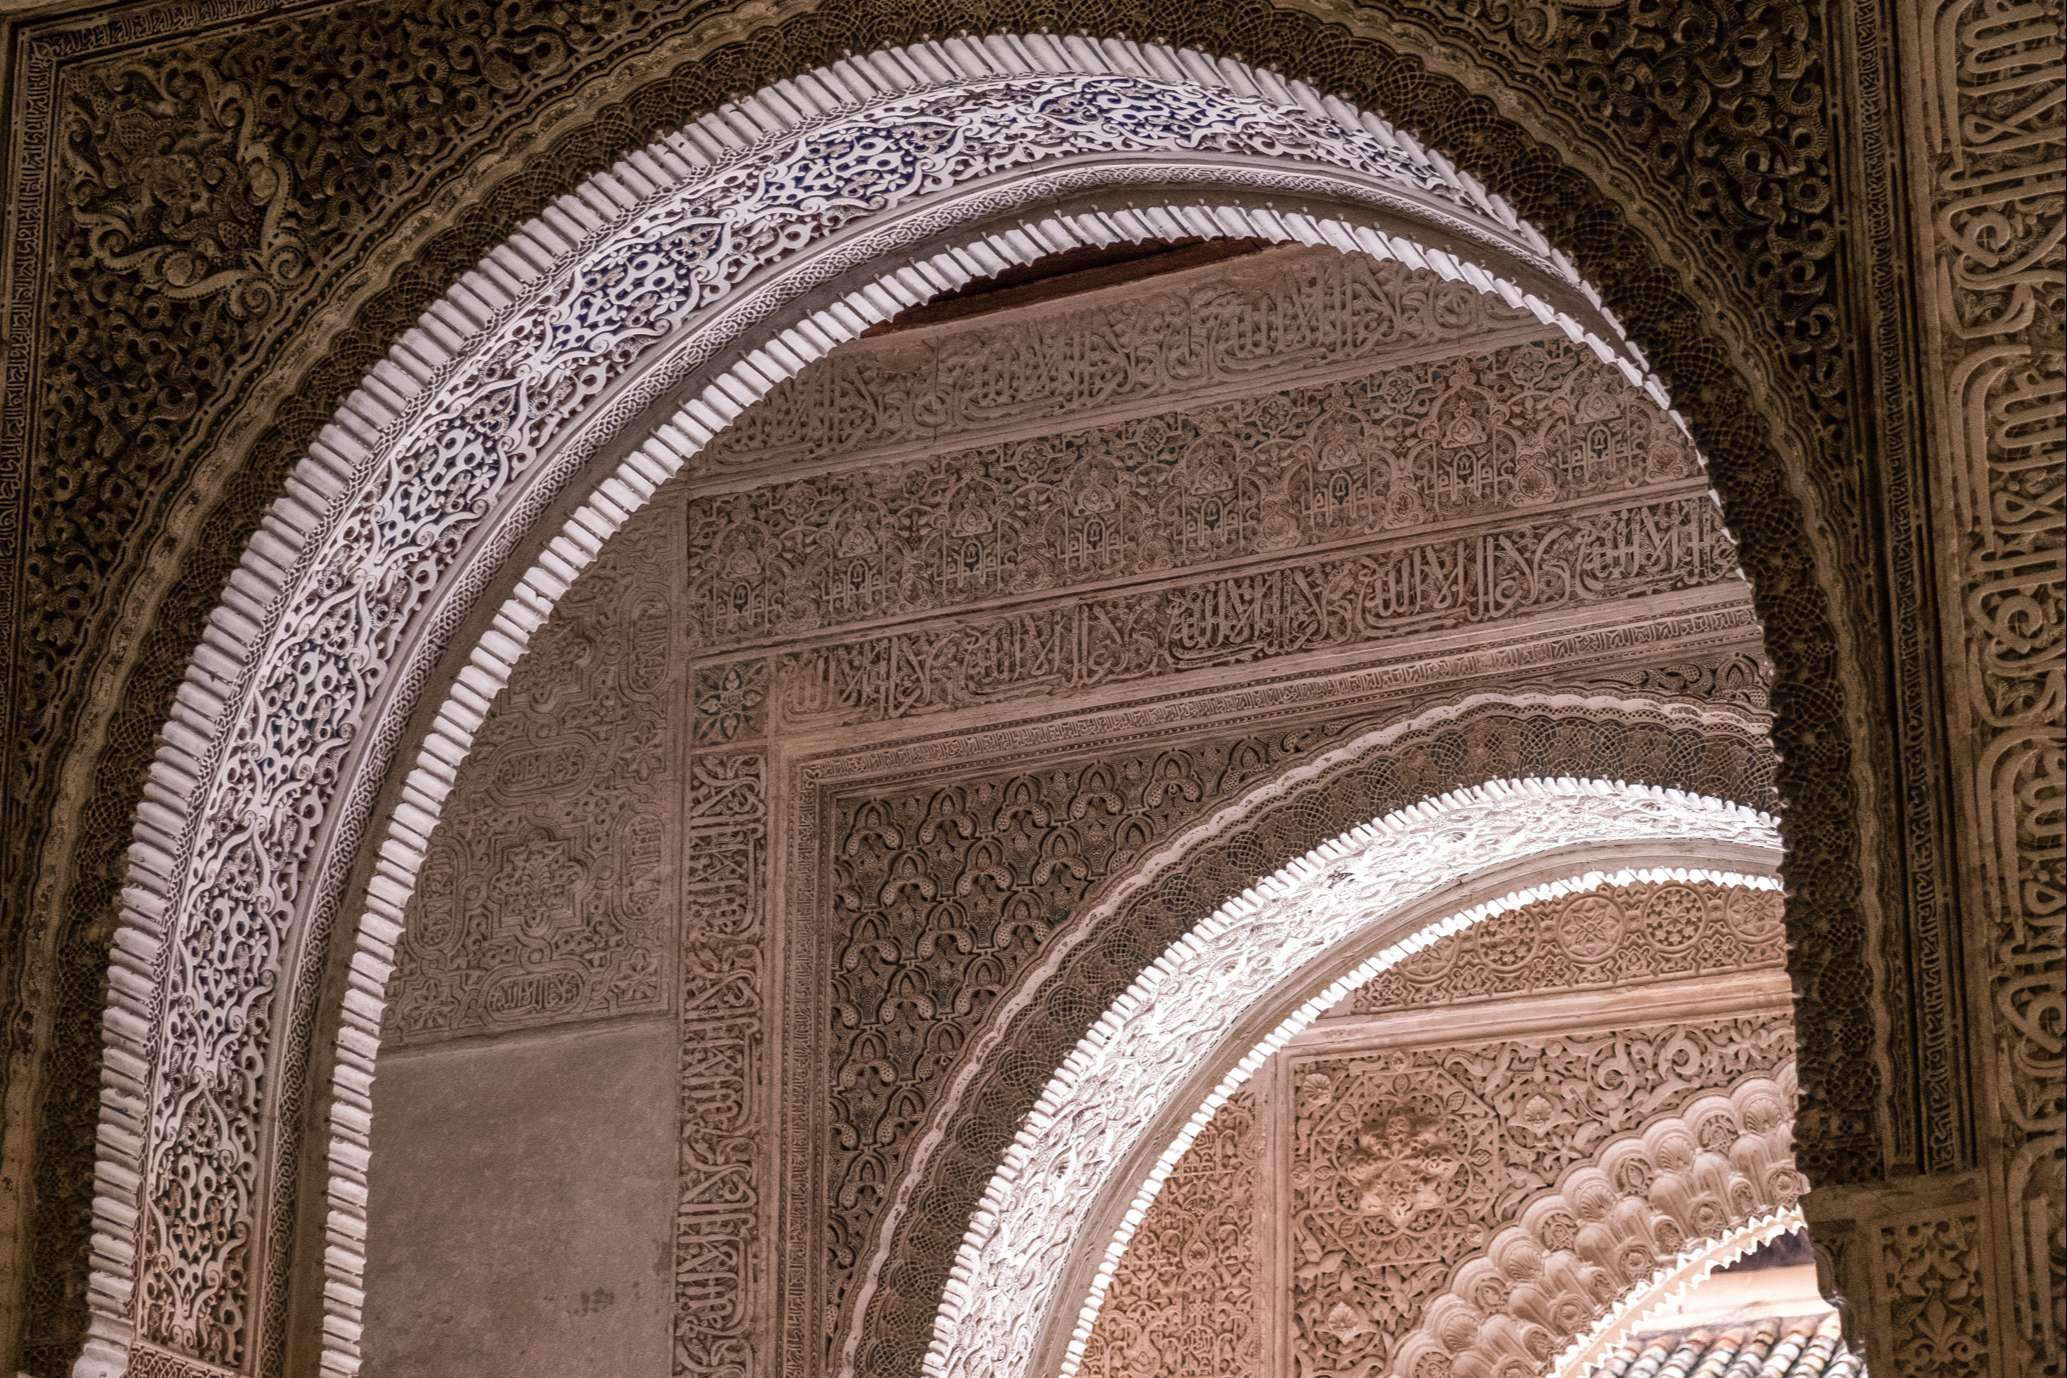 Intricately carved arches, The Alhambra, Granada